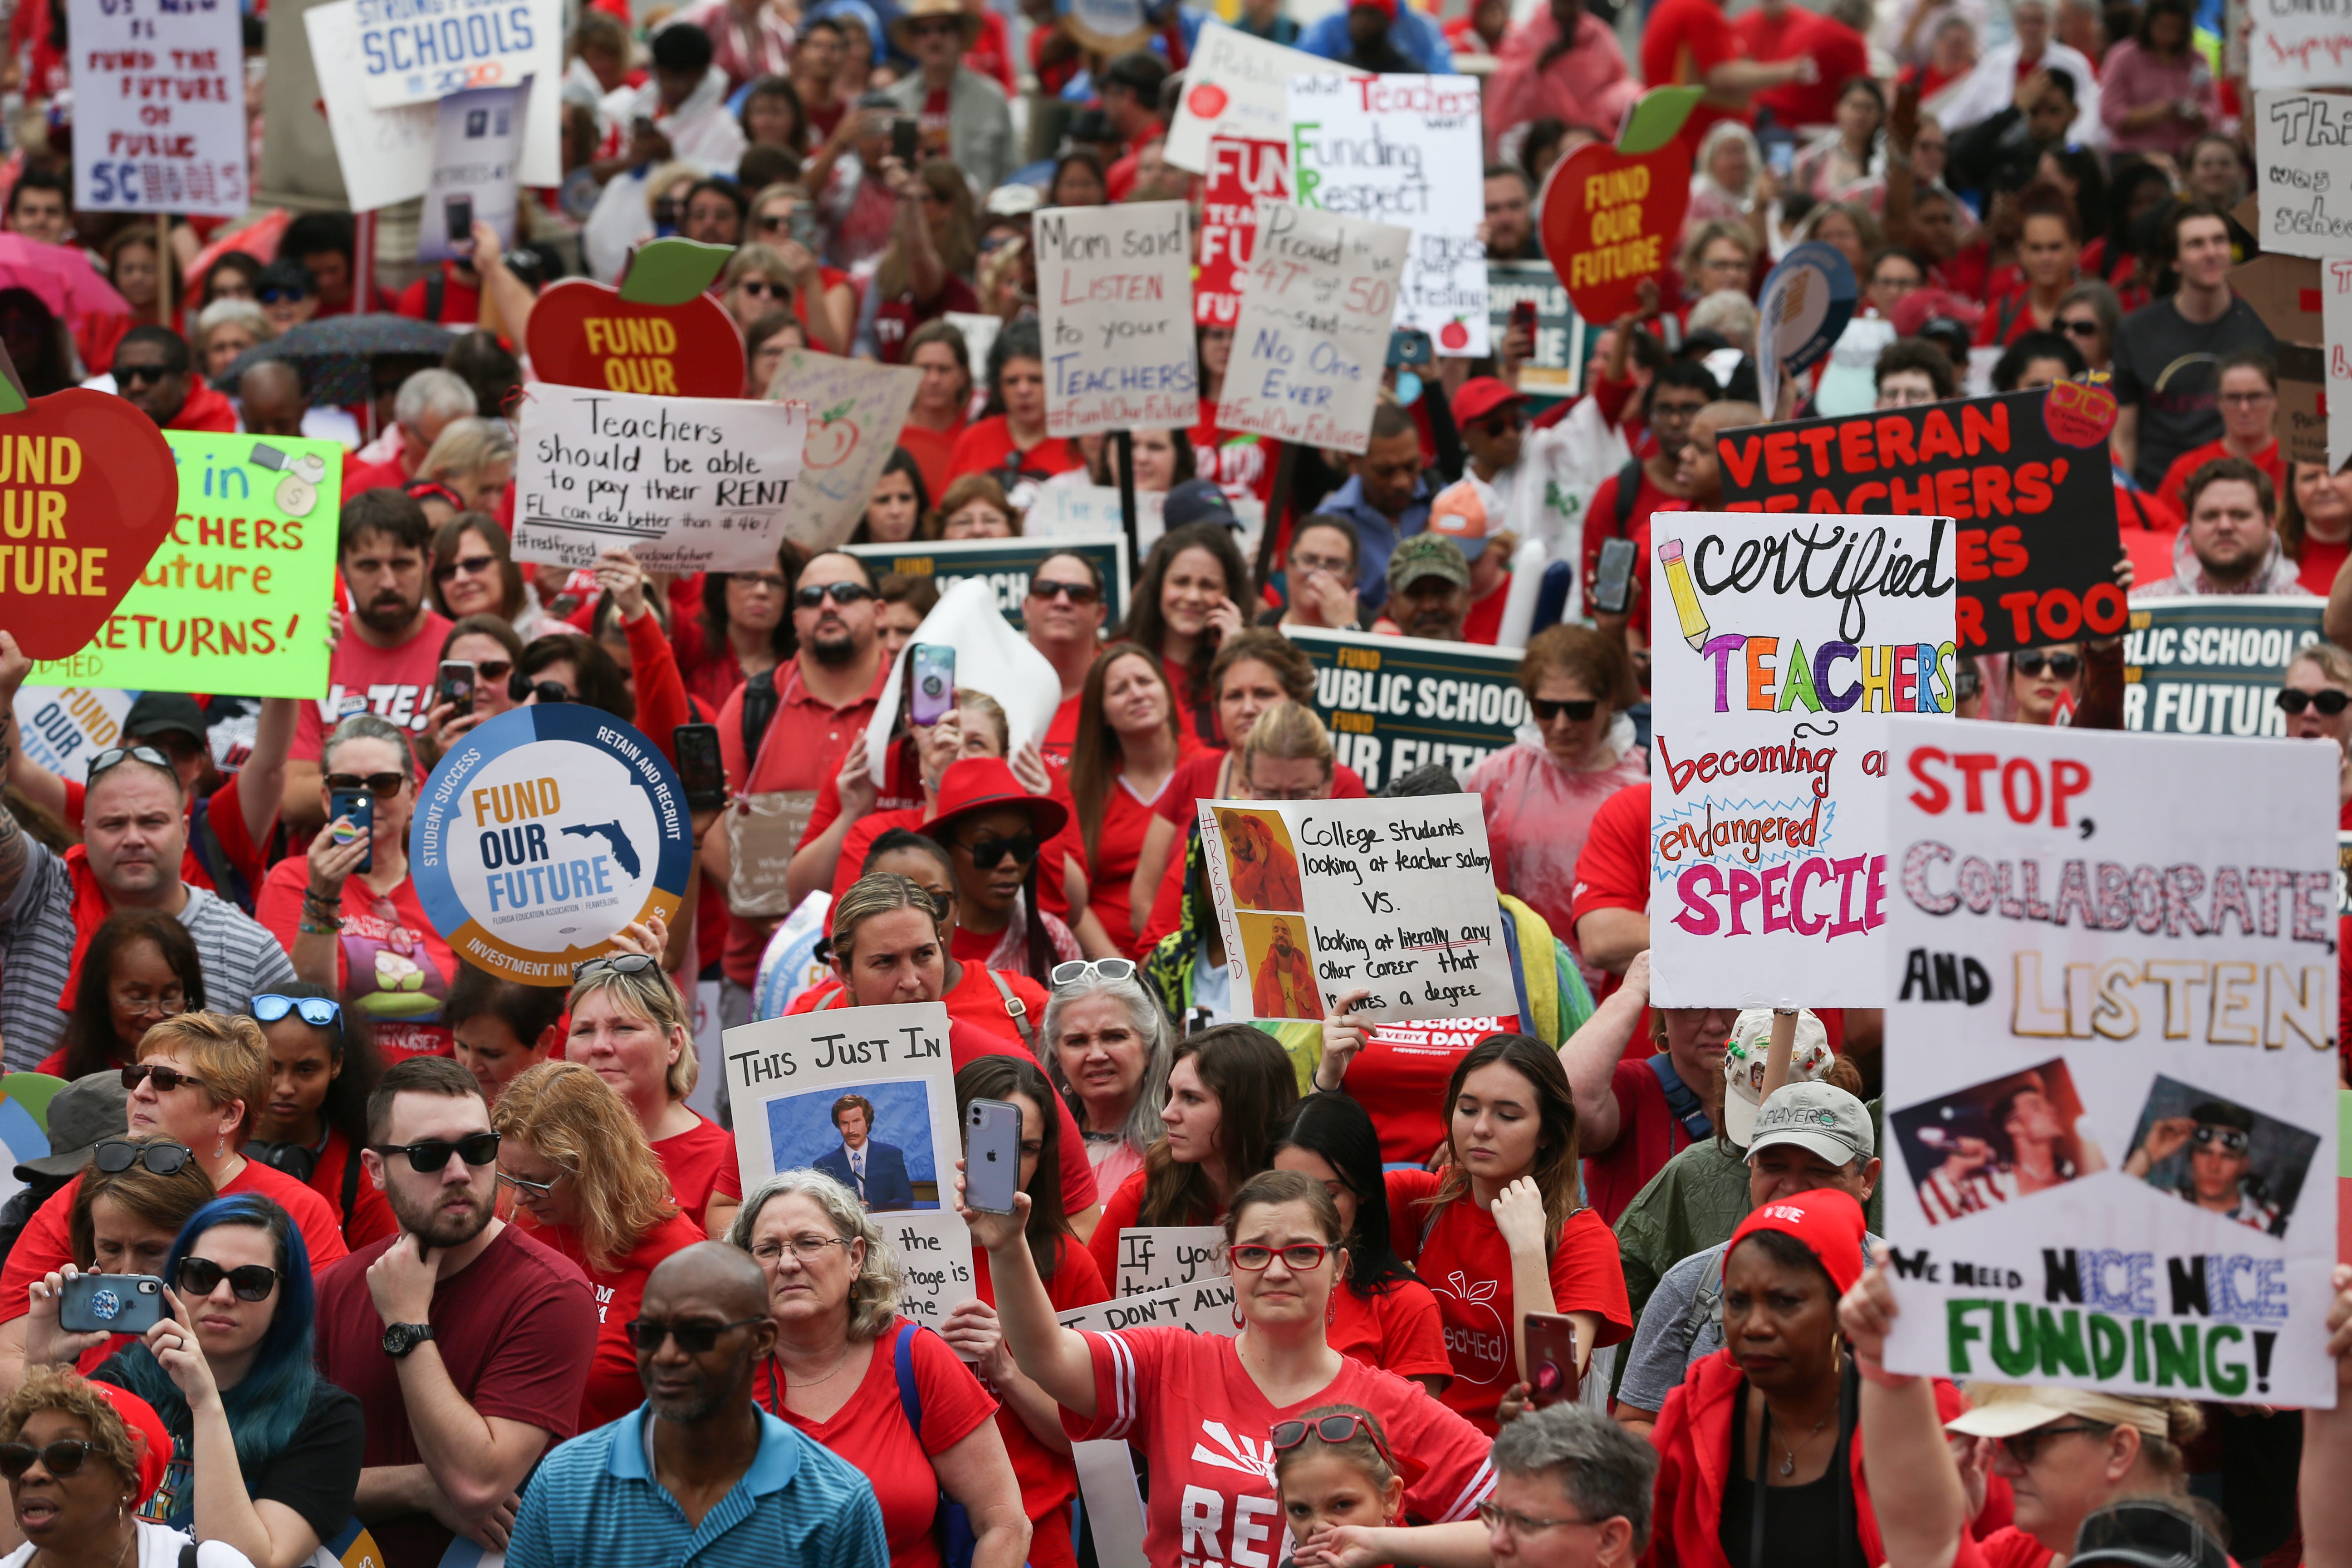 Florida teachers rally over pay, protest salary in Tallahassee march